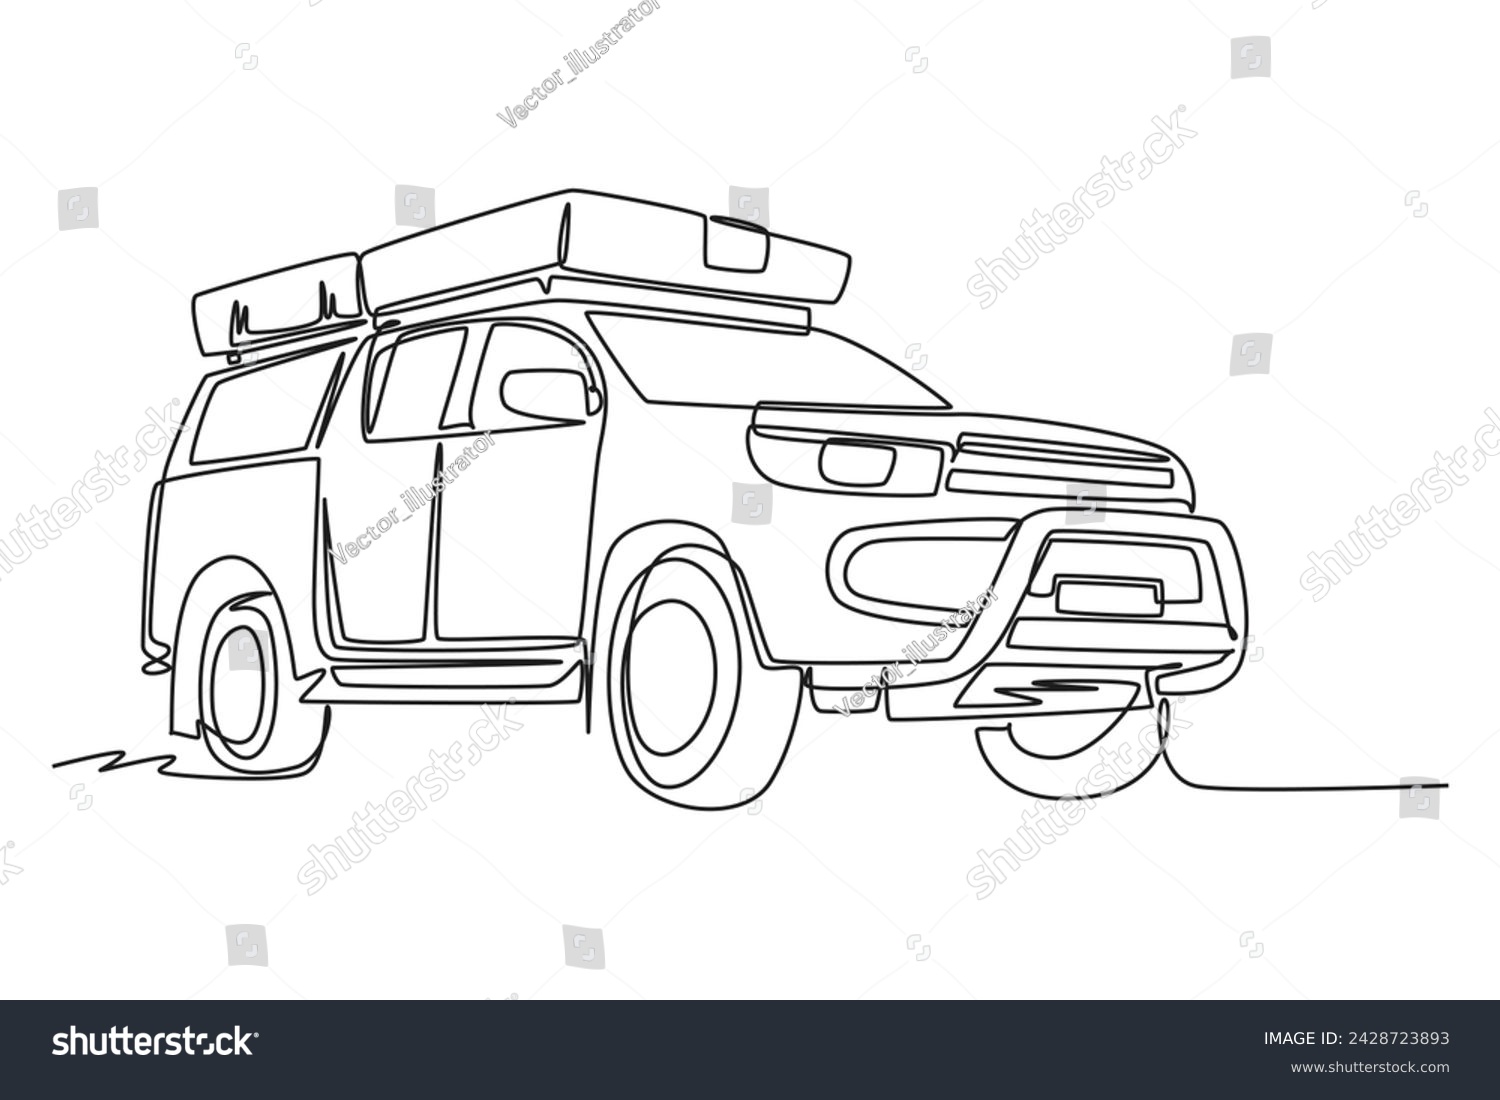 SVG of Single line drawing of tough 4x4 speed jeep wrangler car. Adventure offroad rally vehicle transportation concept. One continuous line draw design svg